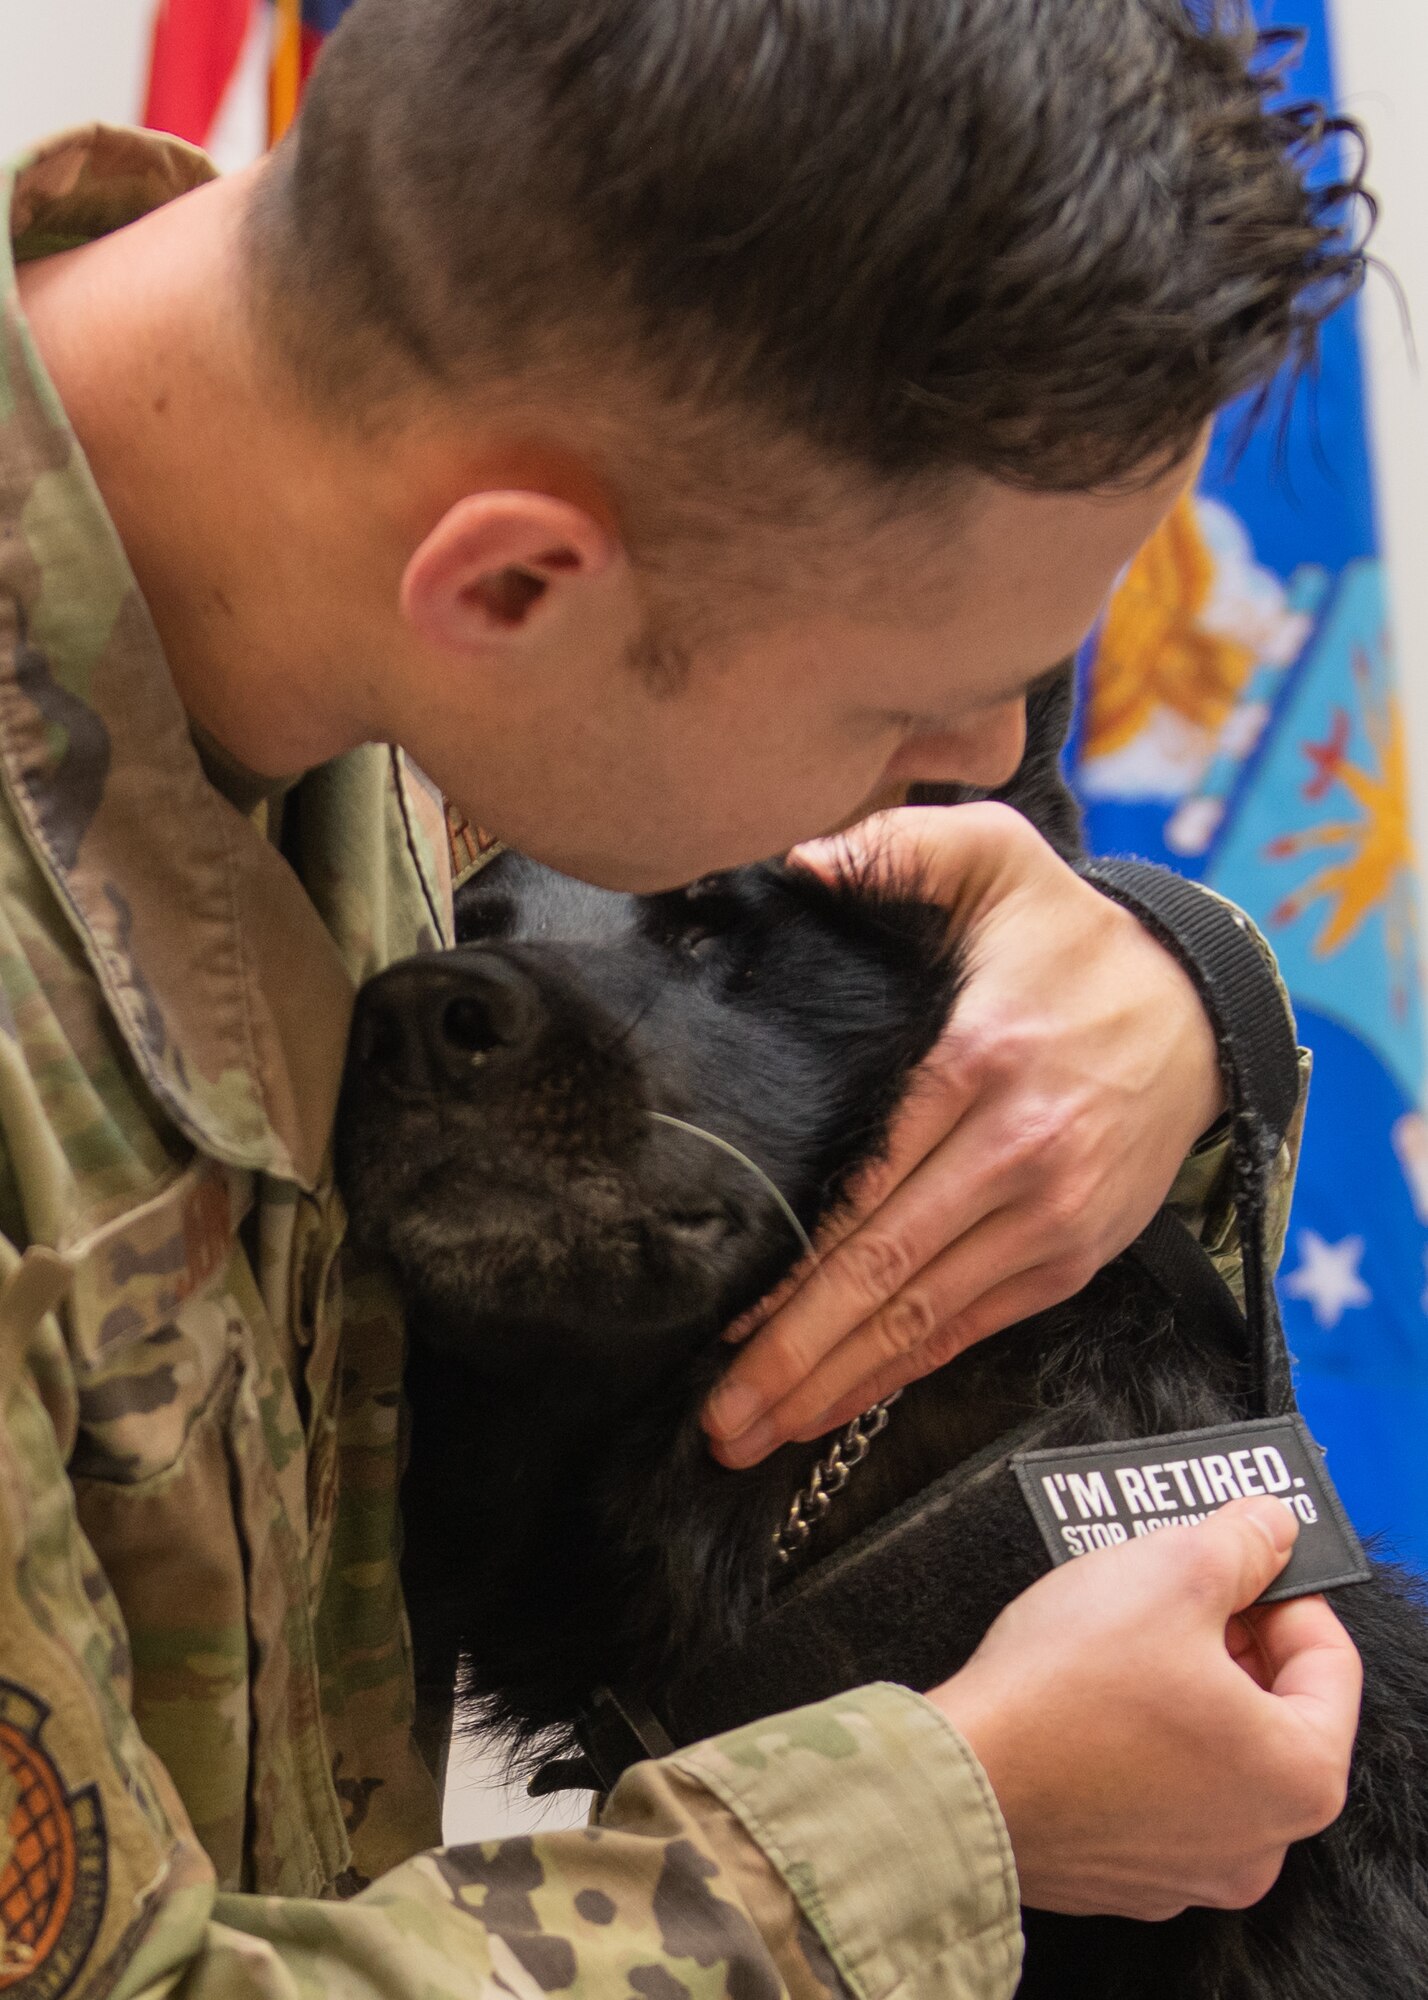 A man in a green uniform places a badge on a black dog.